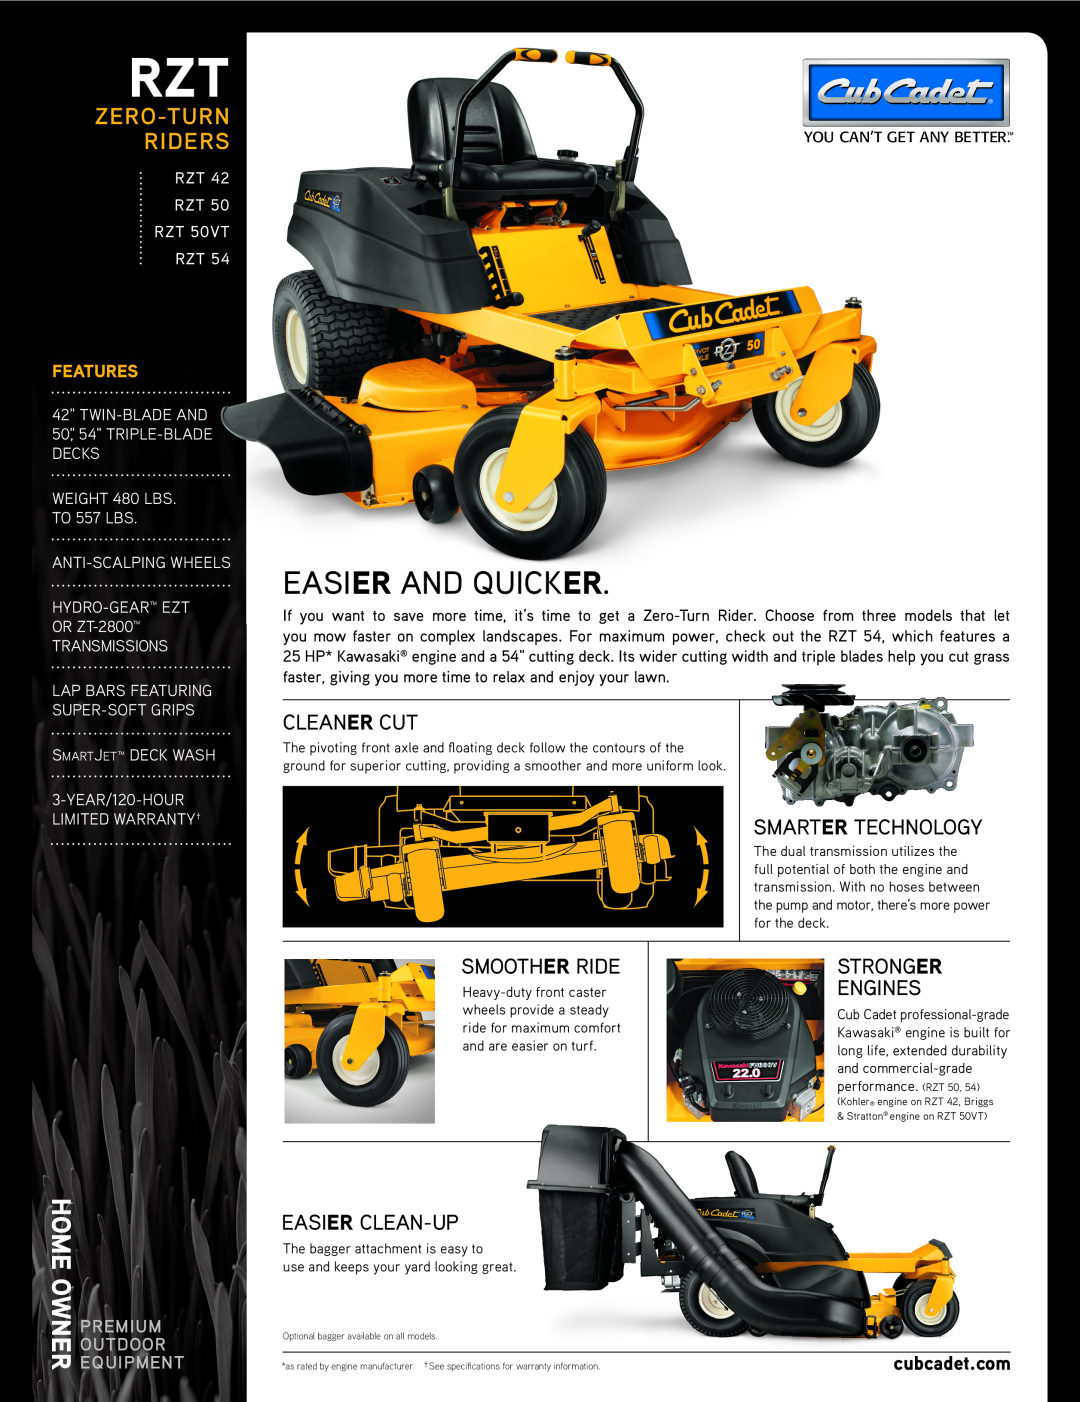 Cub Cadet RZT 42 warranty Easier And Quicker, Ownerhome, Zero-Turn, Riders, Cleaner Cut, Smarter Technology, Smoother Ride 